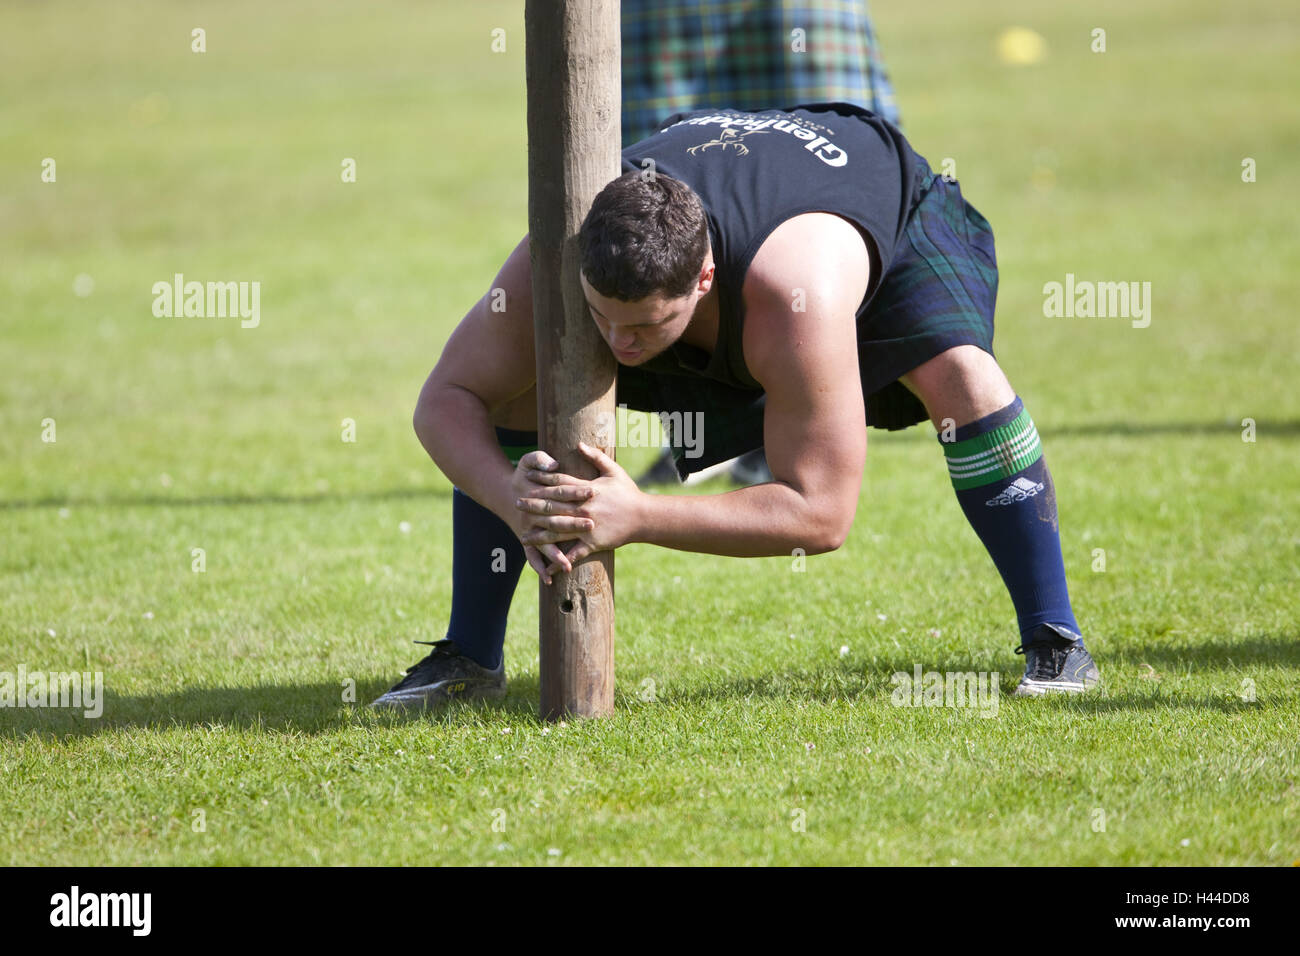 Great Britain, Scotland, Moray, Speyside, Dufftown, Highland Games, trunk throwing, participant, man, position, no model release, Stock Photo